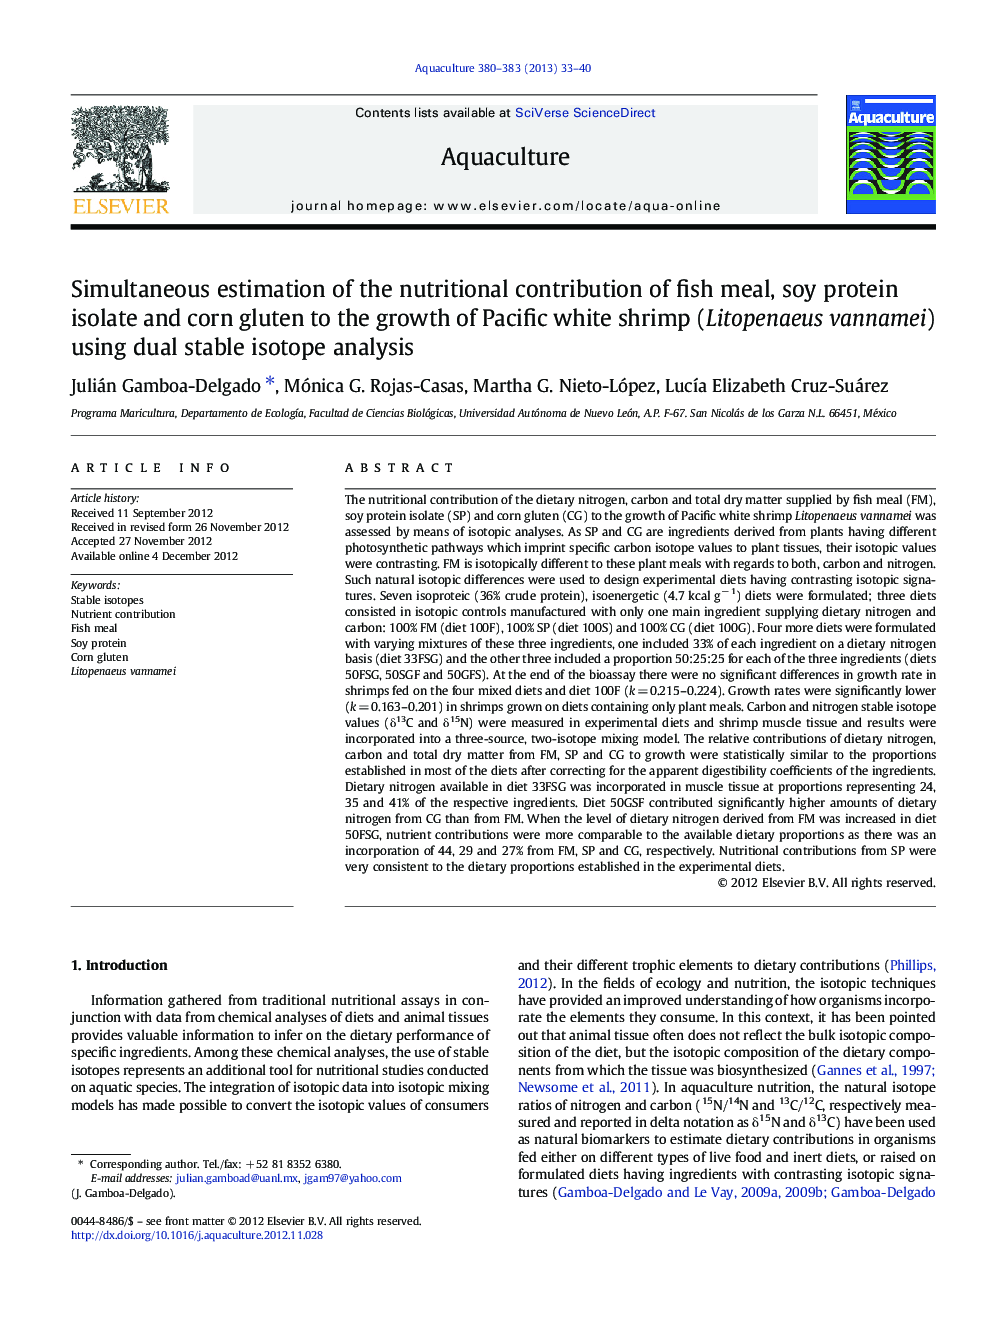 Simultaneous estimation of the nutritional contribution of fish meal, soy protein isolate and corn gluten to the growth of Pacific white shrimp (Litopenaeus vannamei) using dual stable isotope analysis